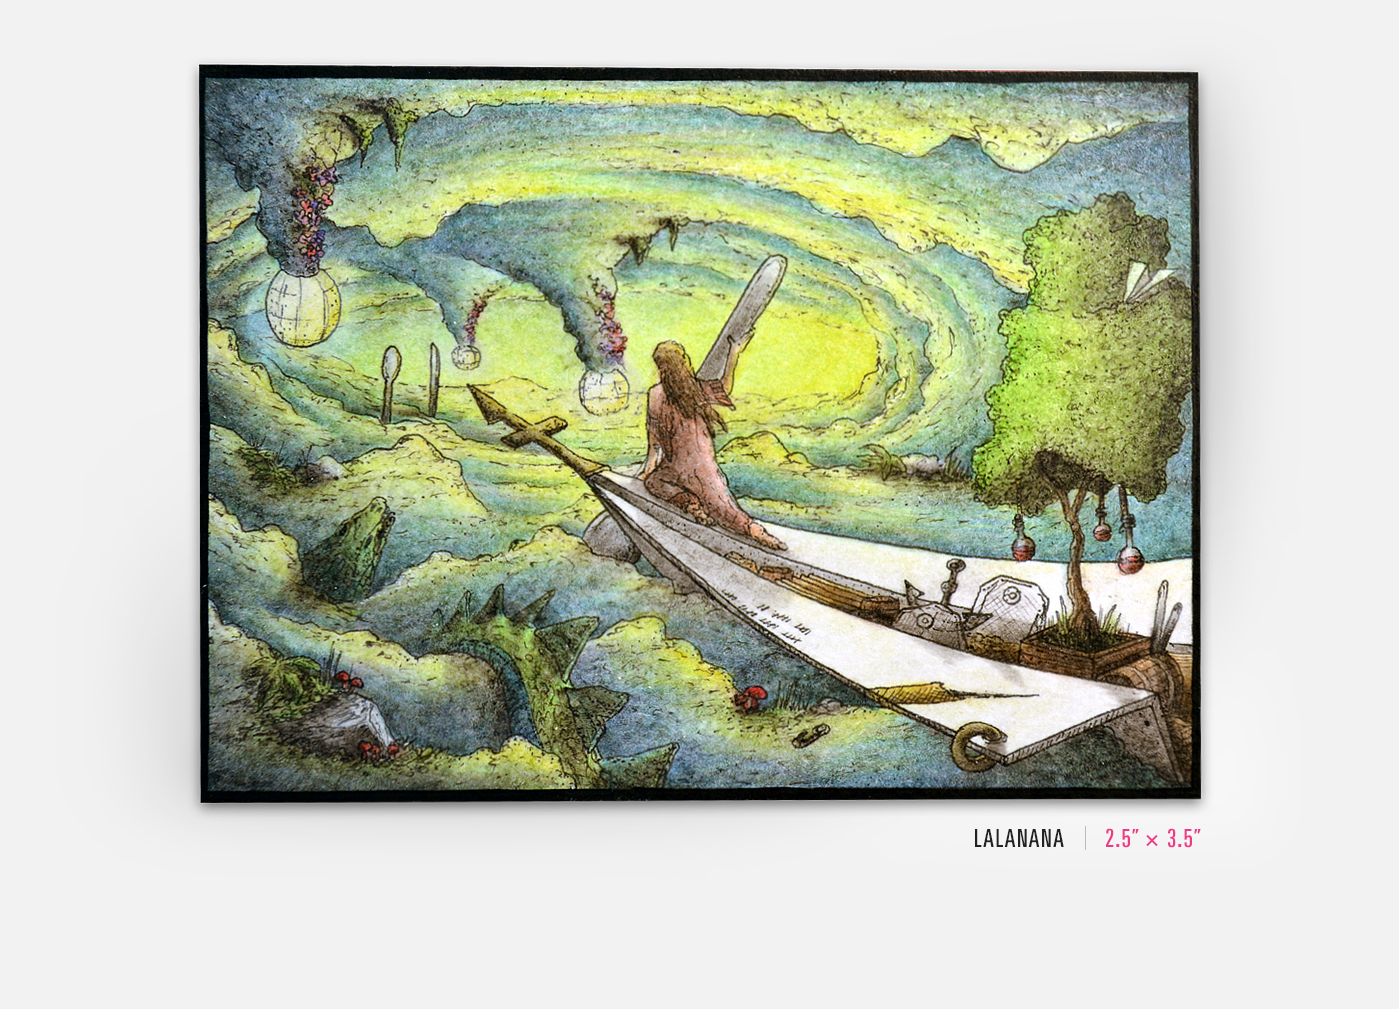 colored pencil pencil ink art trading card aceo Small Format Art fantasy surreal ILLUSTRATION  Drawing 